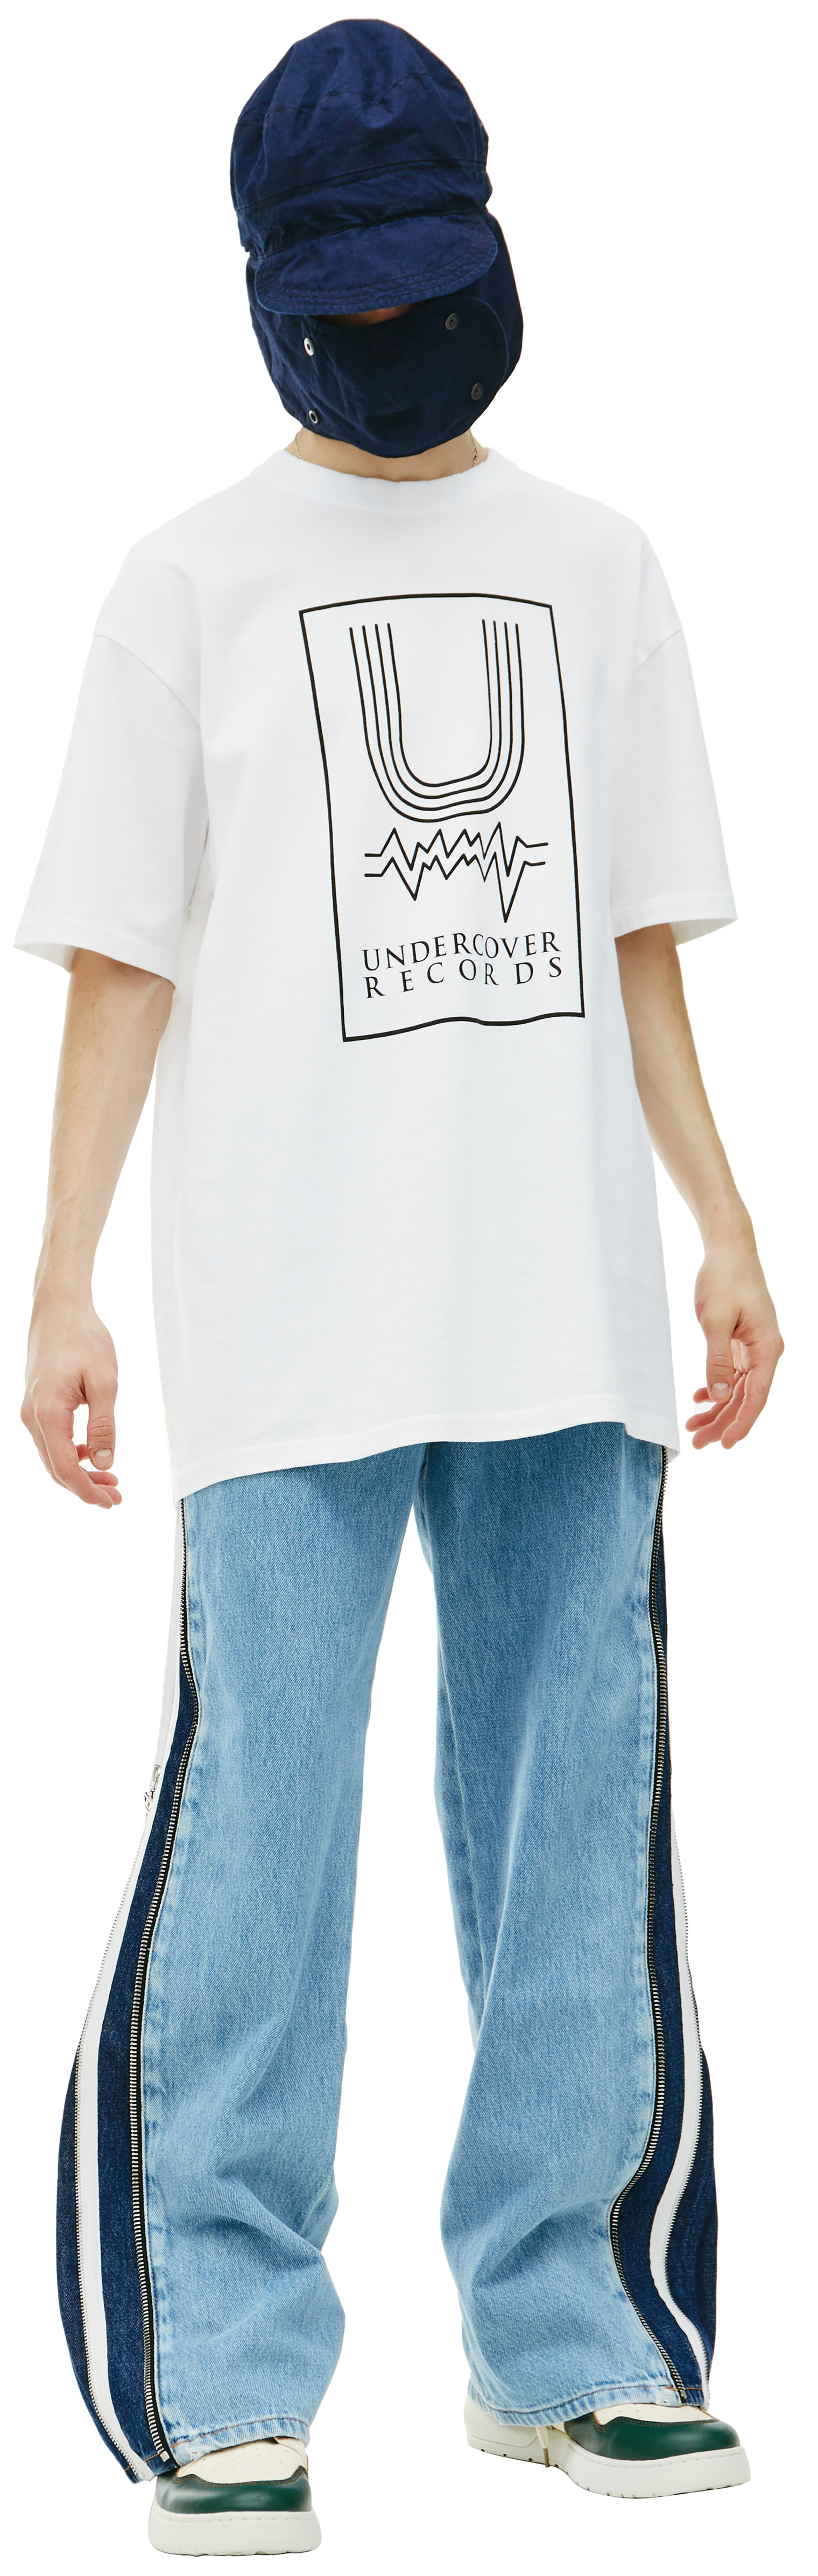 Undercover White Undercover Records t-shirt